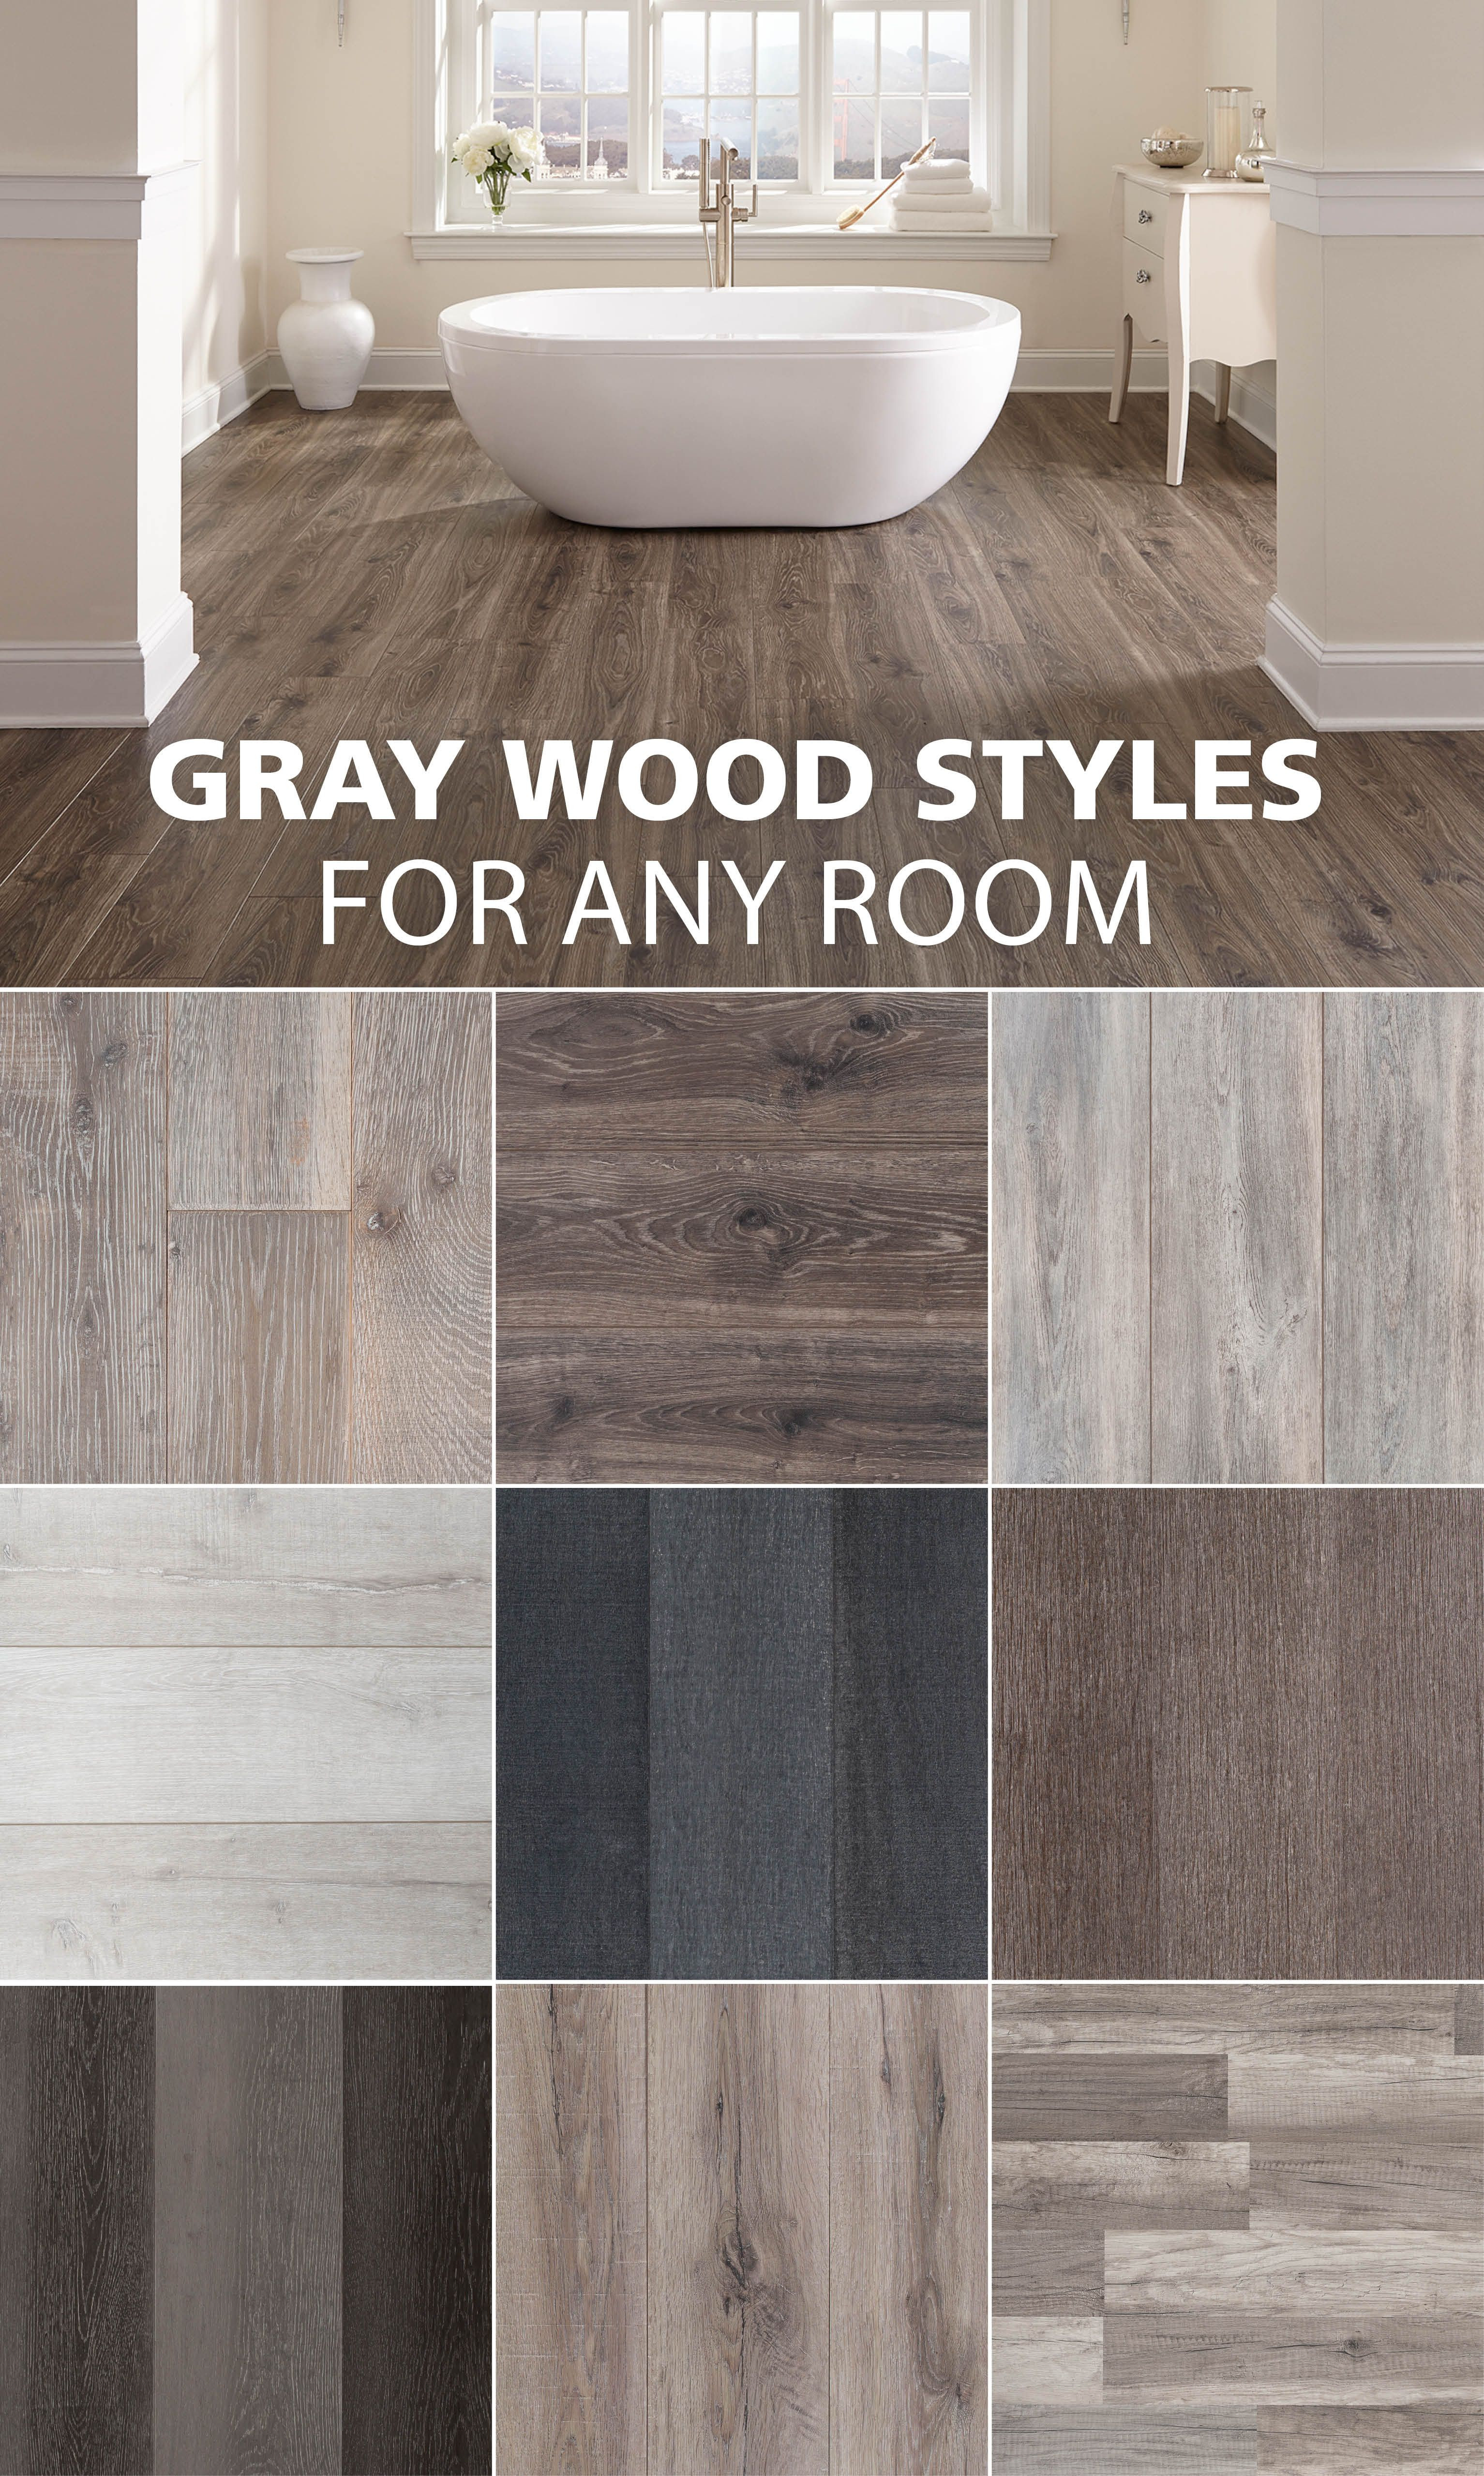 12 Best Hardwood Floor Refinishing Reviews 2022 free download hardwood floor refinishing reviews of here are some of our favorite gray wood look styles home decor for here are some of our favorite gray wood look styles